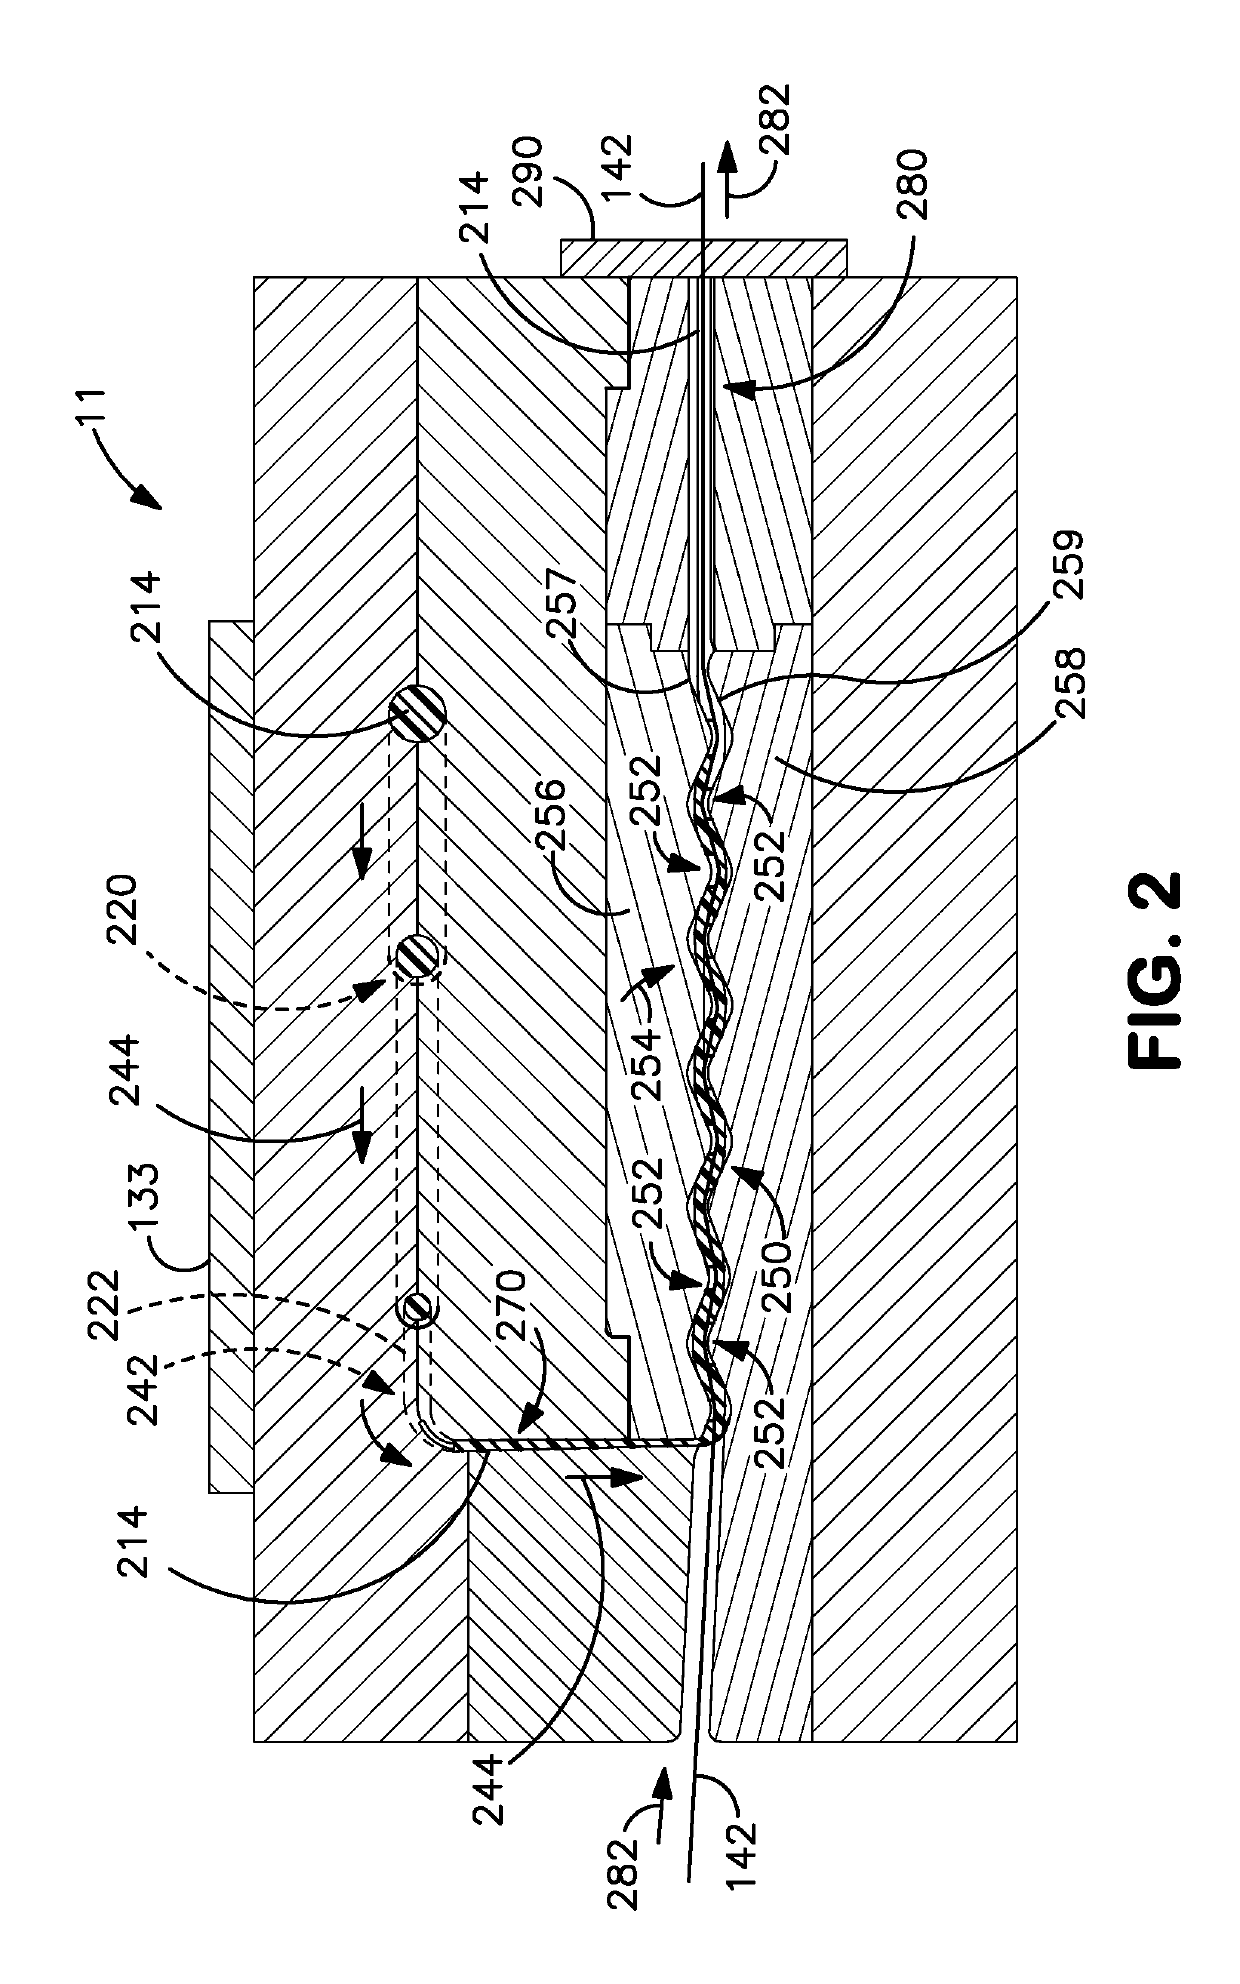 Electronic Module for Use in an Automotive Vehicle